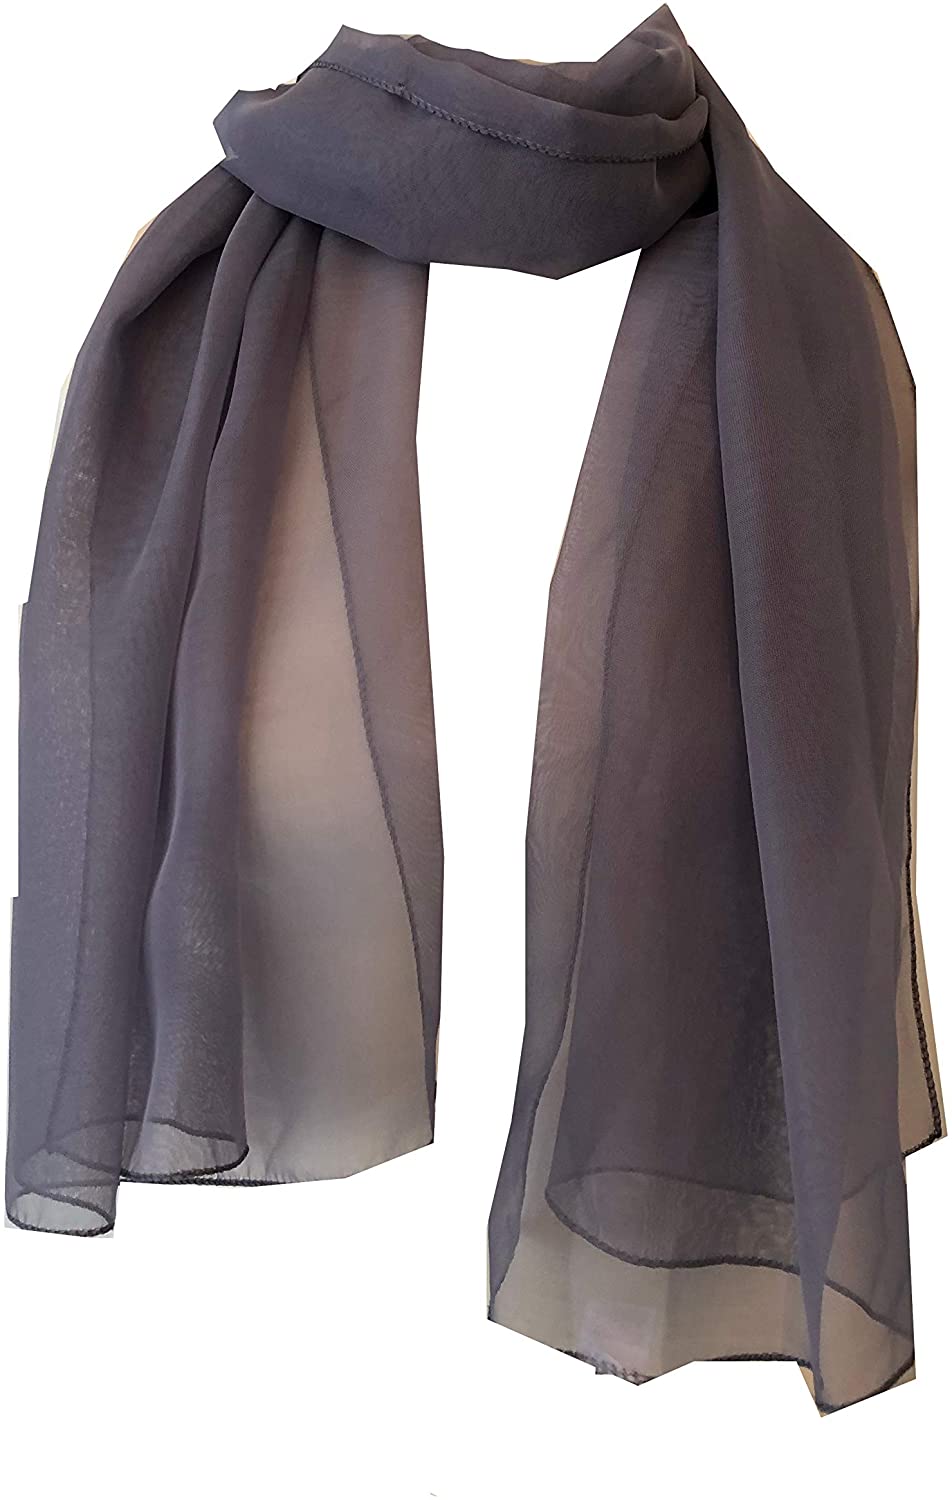 Plain Dark Grey Chiffon Style Scarf Thin Pretty Scarf Great for Any Outfit Lovely Gift